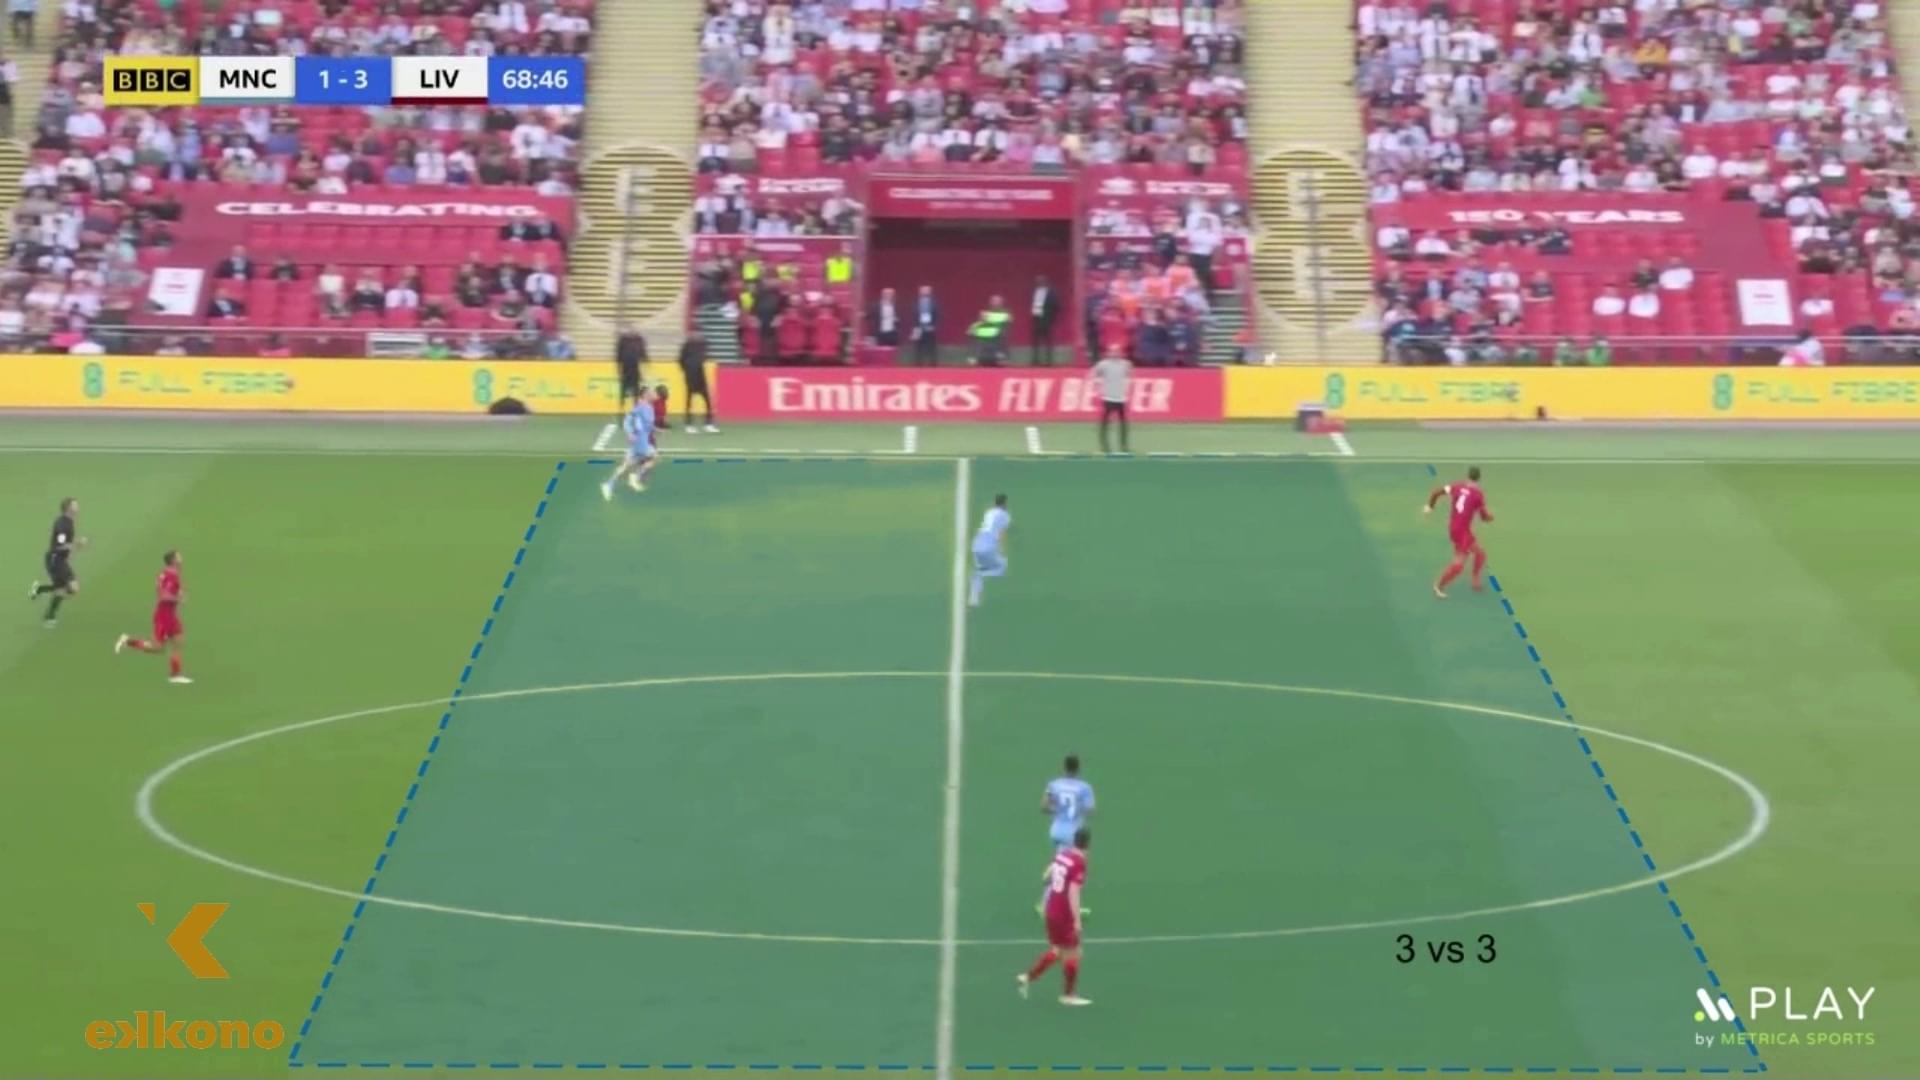 caption of a match between MCI and LIV, focusing on the midfielders area